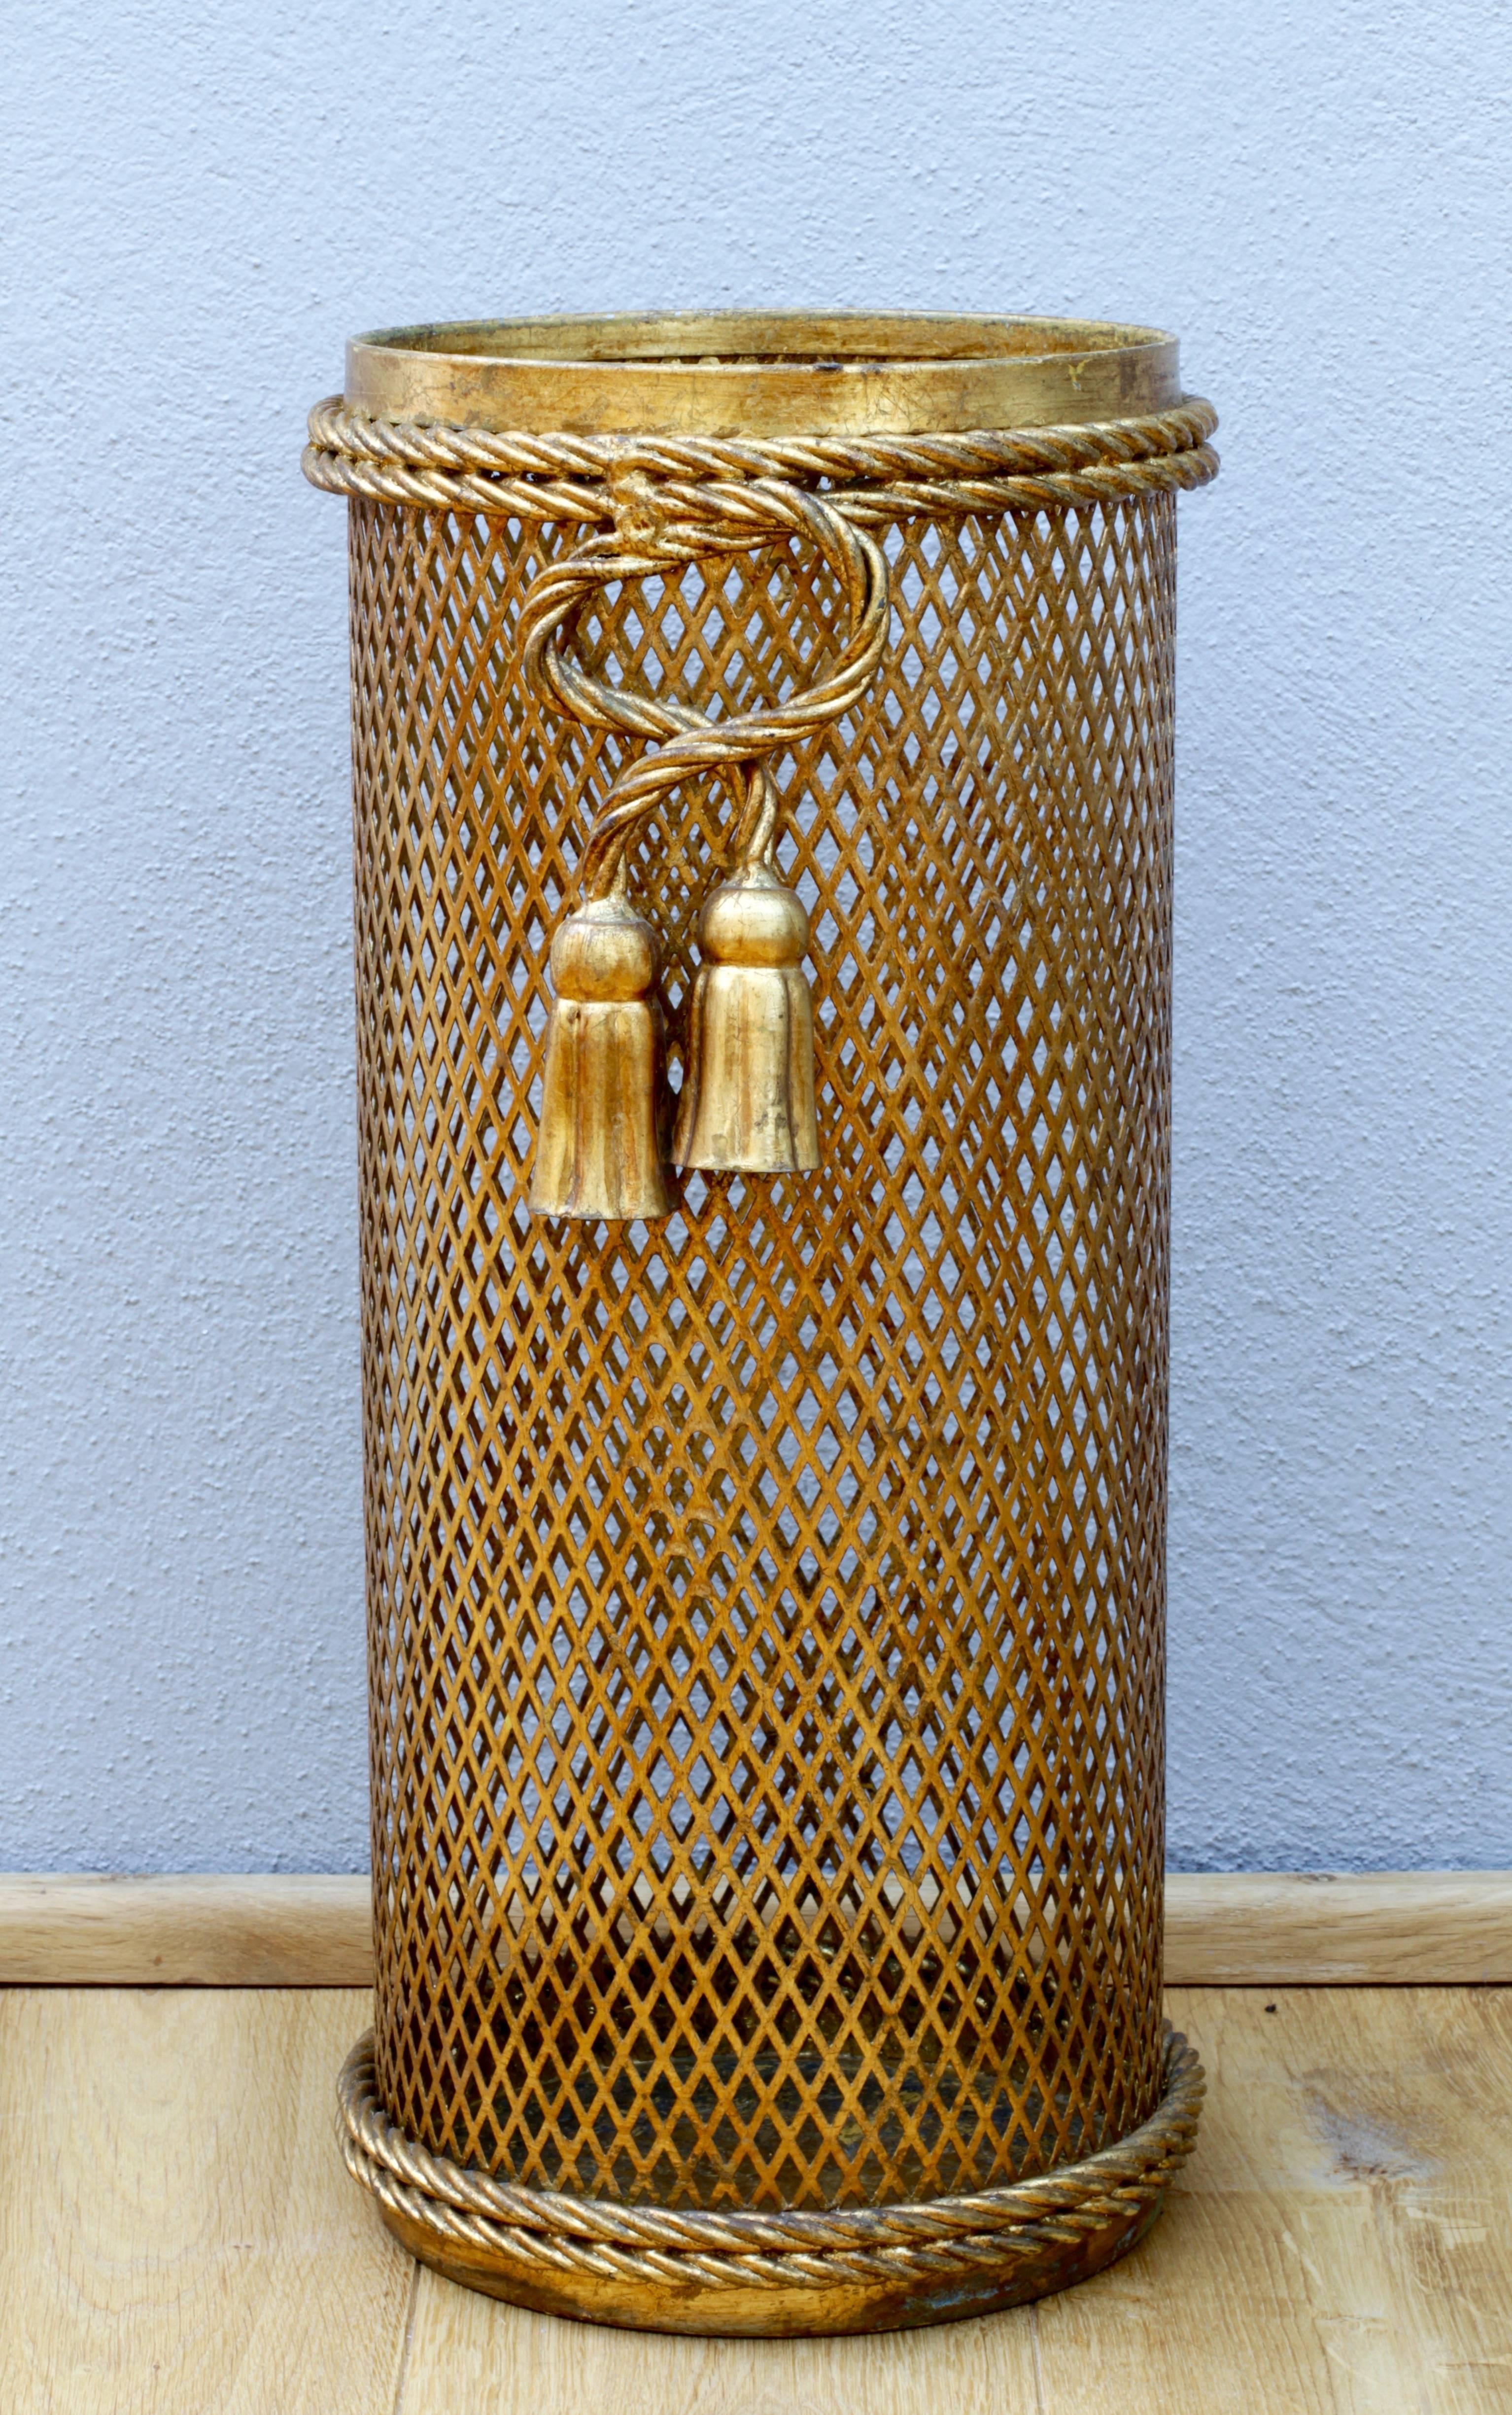 Stunning Mid-Century gold/gilt/gilded Hollywood Regency style umbrella stand or holder made in Florence, Italy, circa 1950 by Li Puma Firenze. The perforated lattice patterned metalwork with bent rope and tassel details finish the piece perfectly.